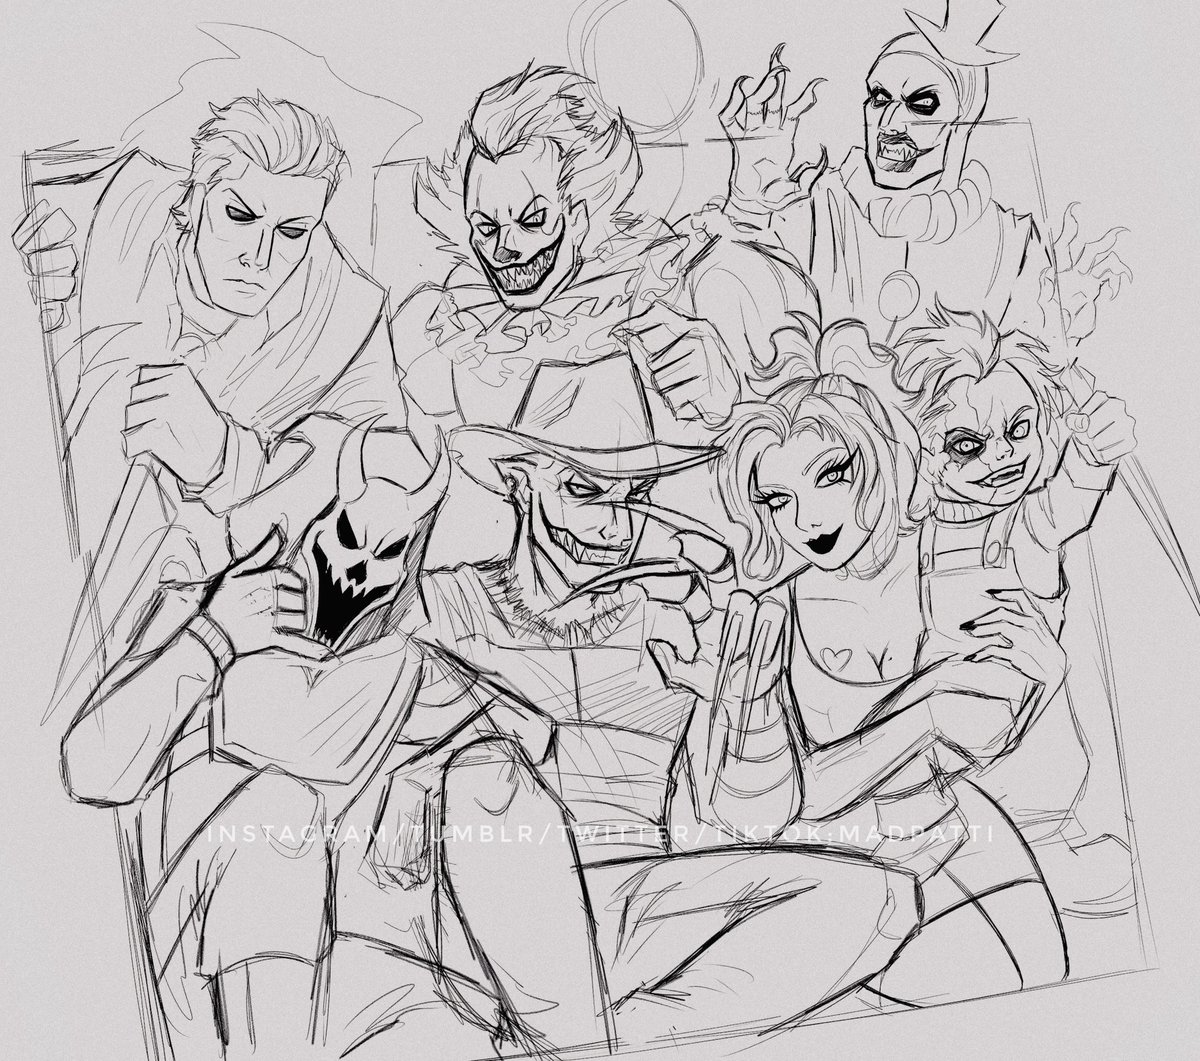 Was feeling a bit better today because I actually got some sleep for once. So I finished a sketch I started a while a go. A slasher/horror group picture 👀 I'm starting to feel better overall too so I should be back to post drawings again soon